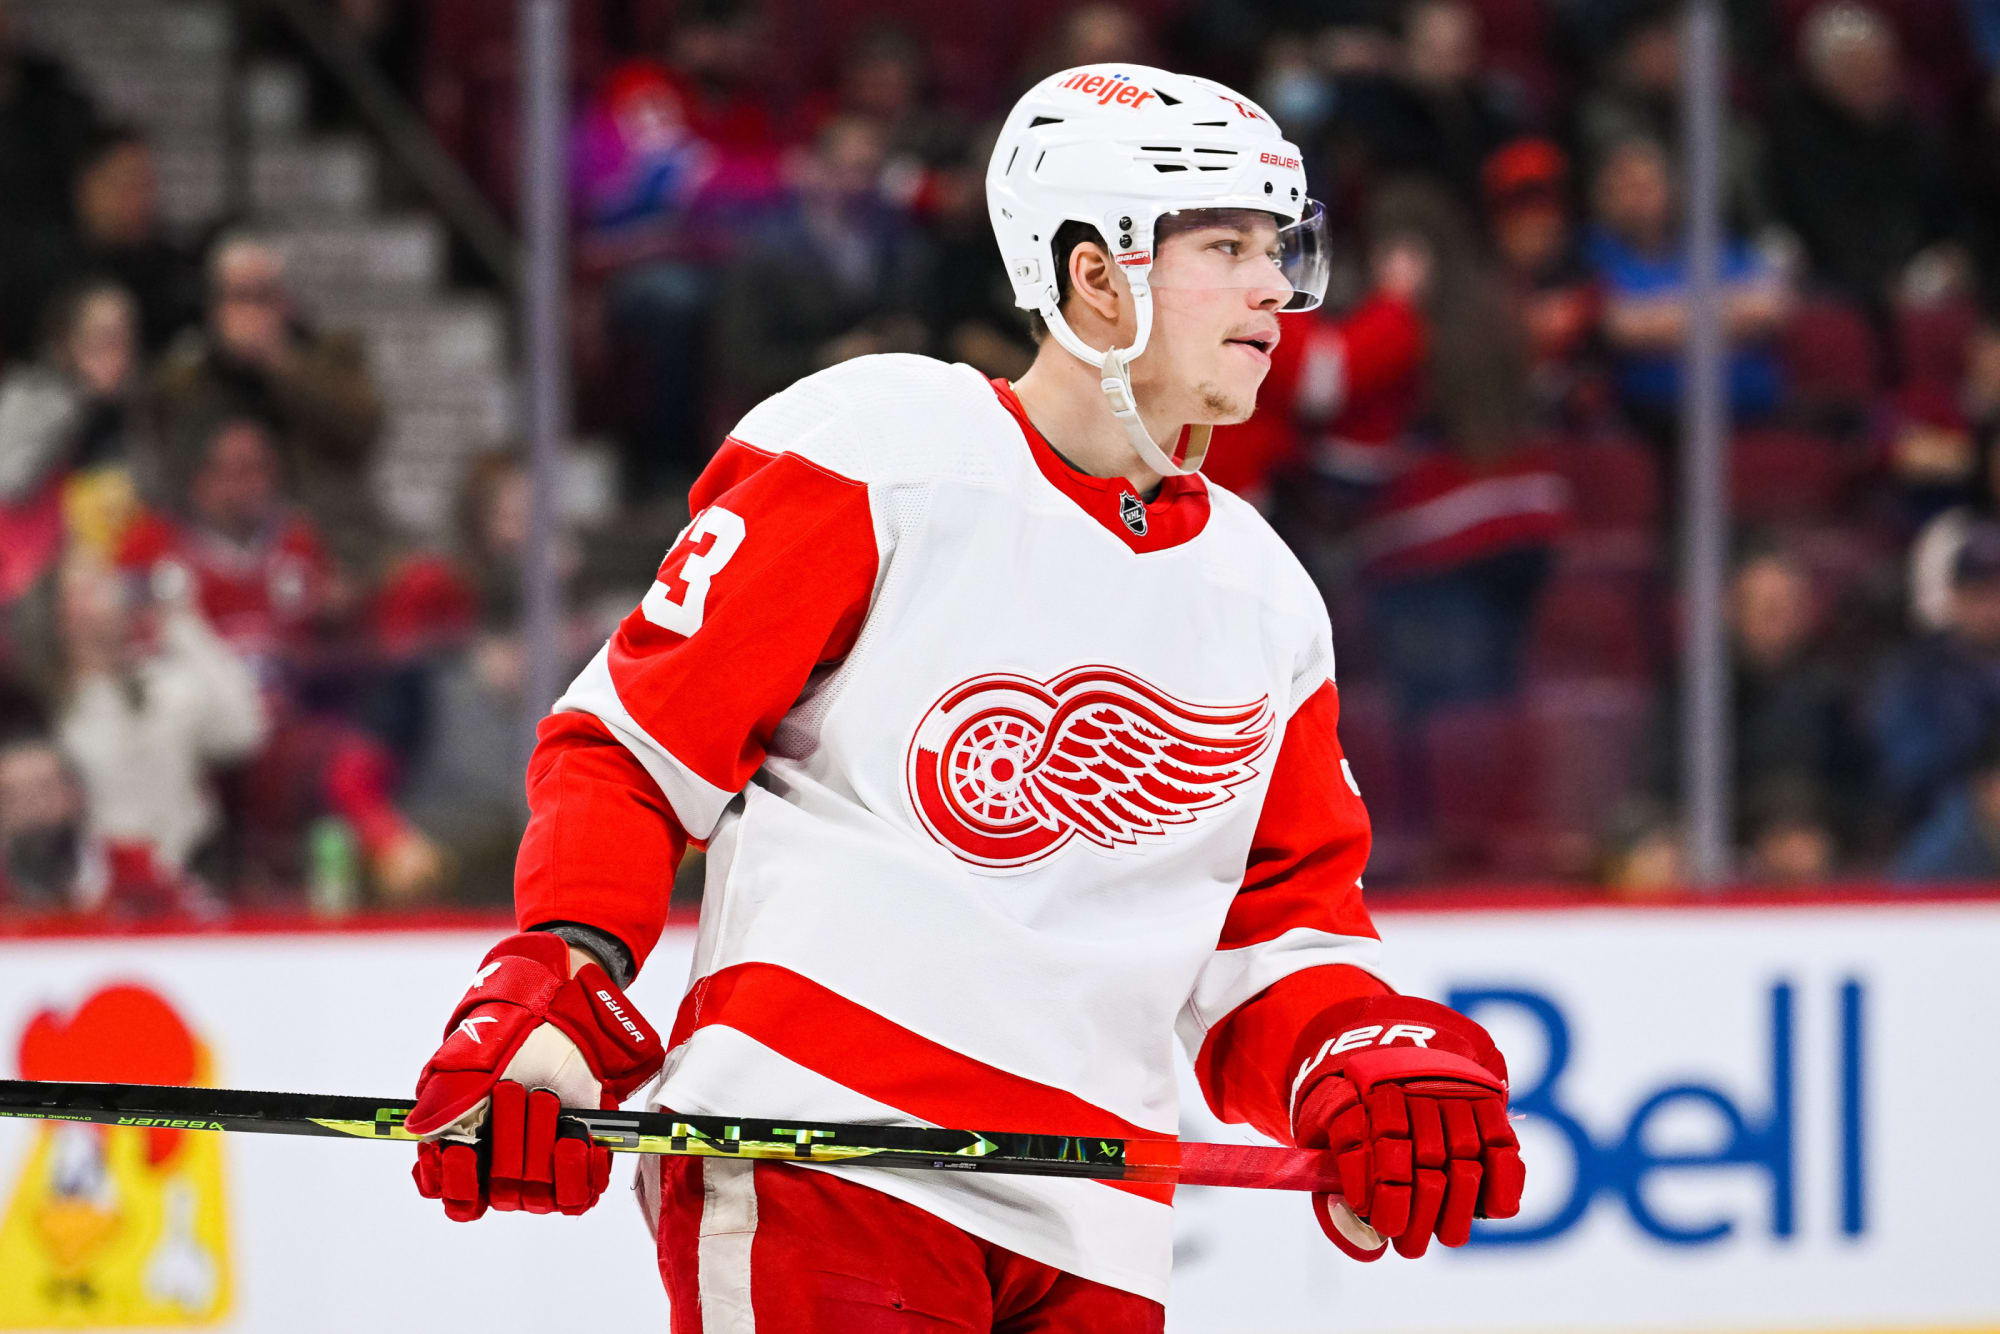 He wants the pressure': Lucas Raymond is built for the Red Wings